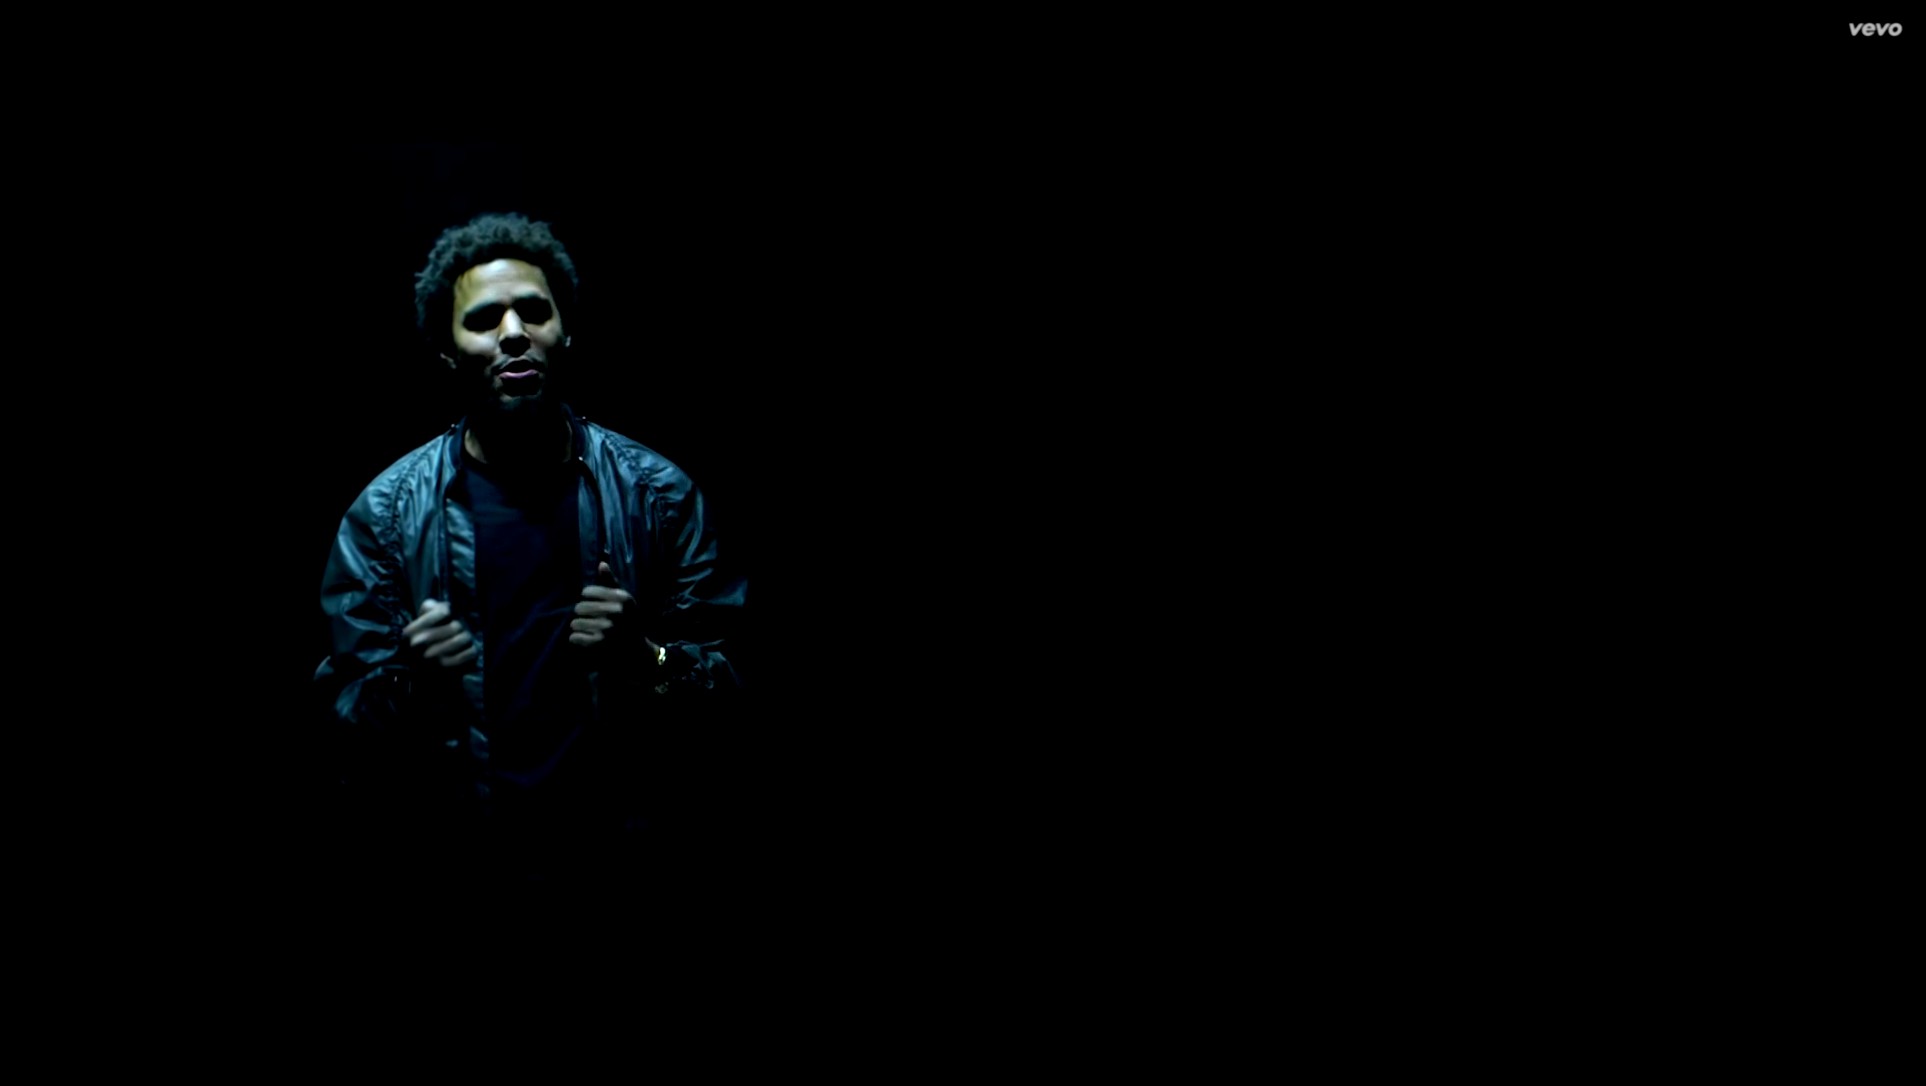 J Cole wallpaper ·① Download free cool full HD backgrounds ...